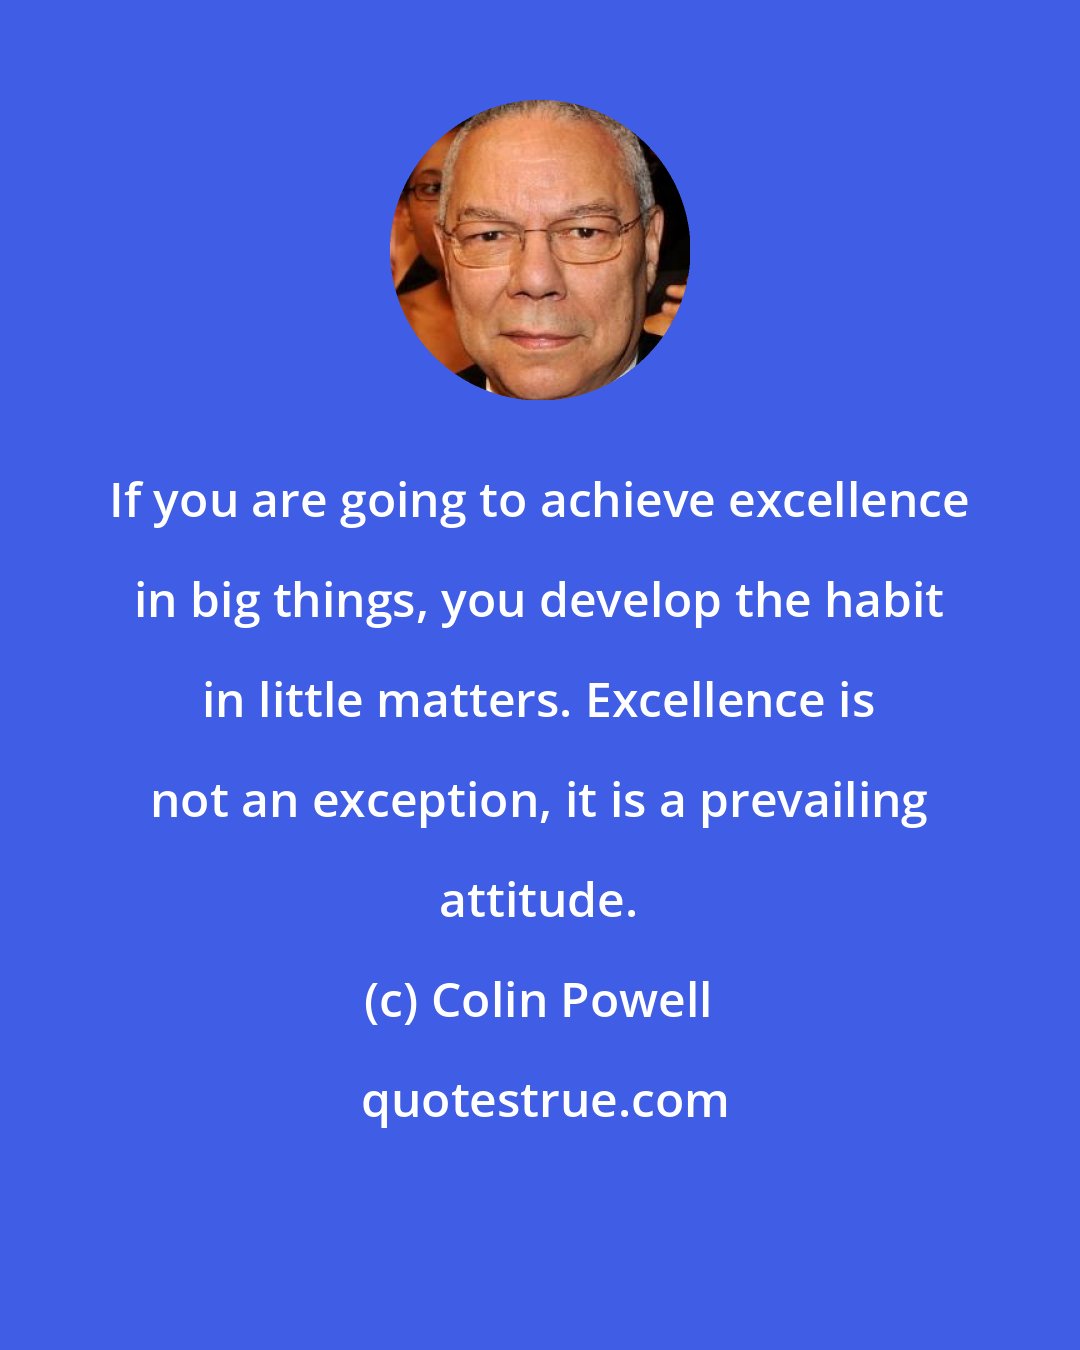 Colin Powell: If you are going to achieve excellence in big things, you develop the habit in little matters. Excellence is not an exception, it is a prevailing attitude.